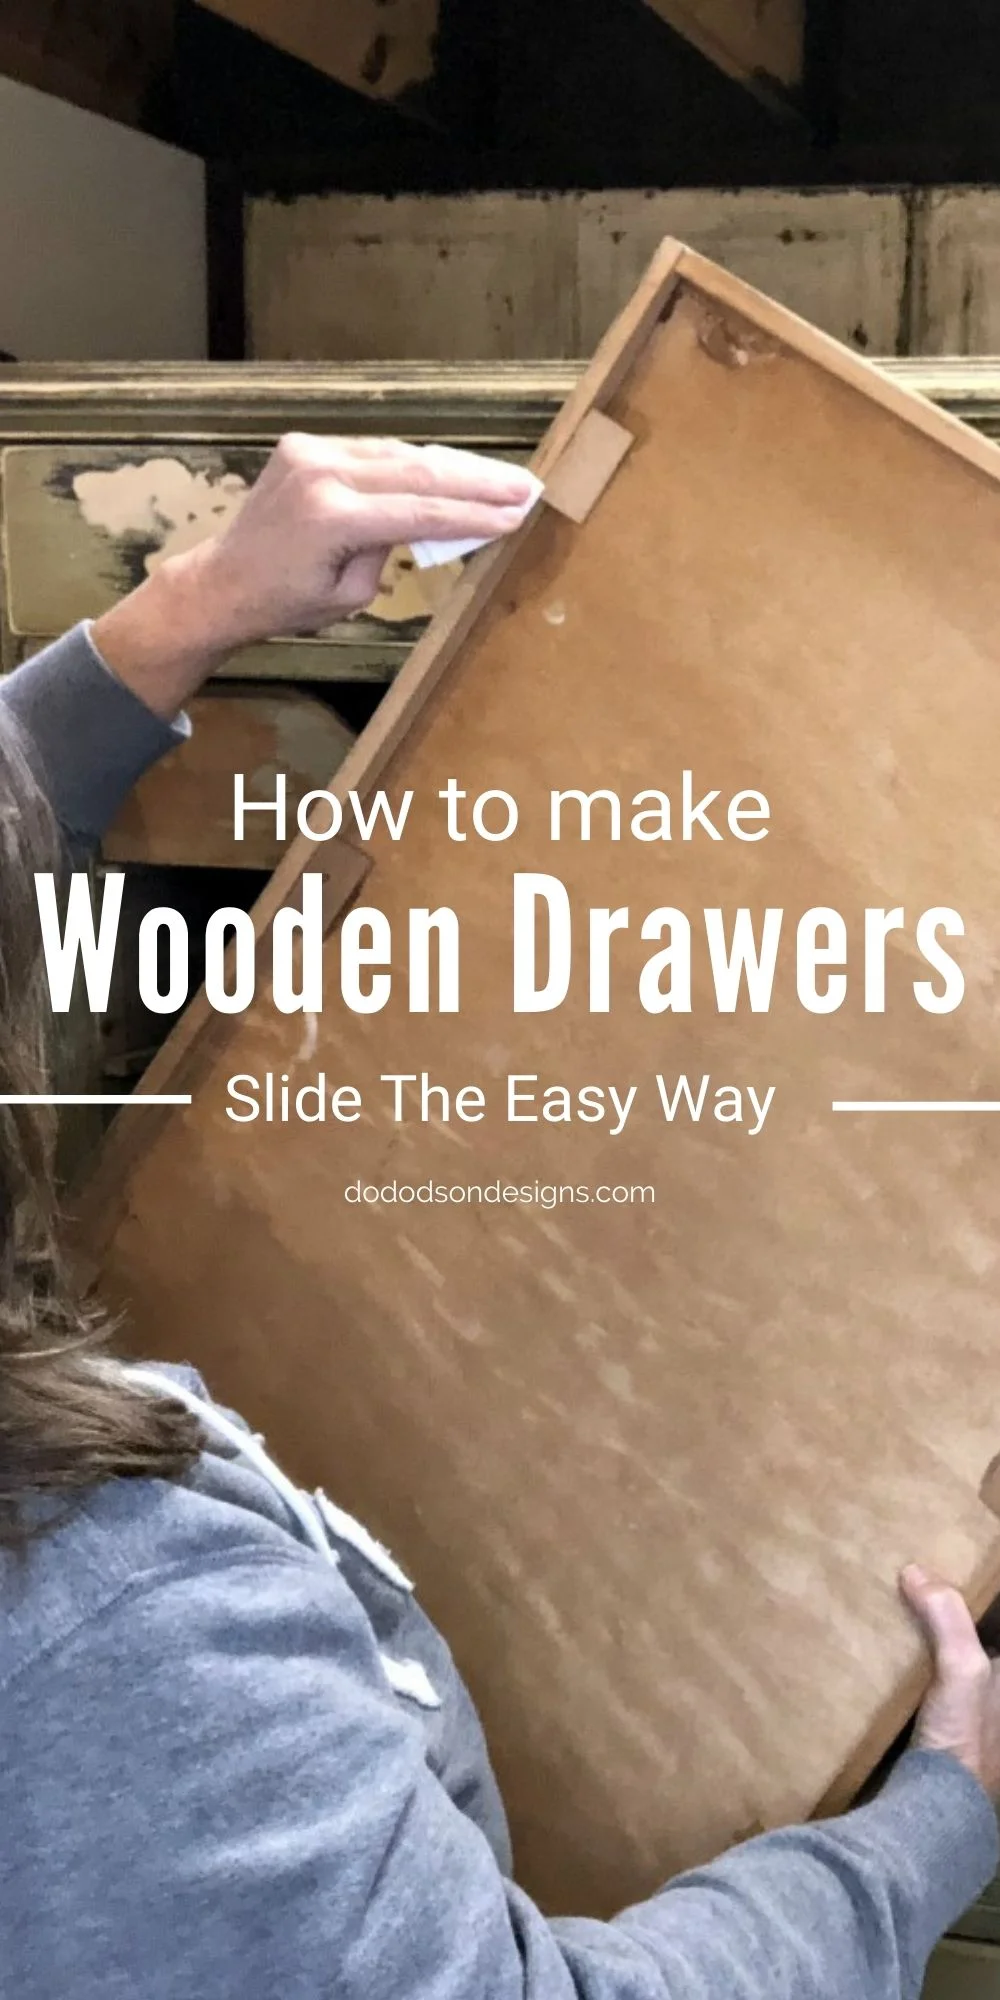 How To Make Wooden Drawers Slide The Easy Way